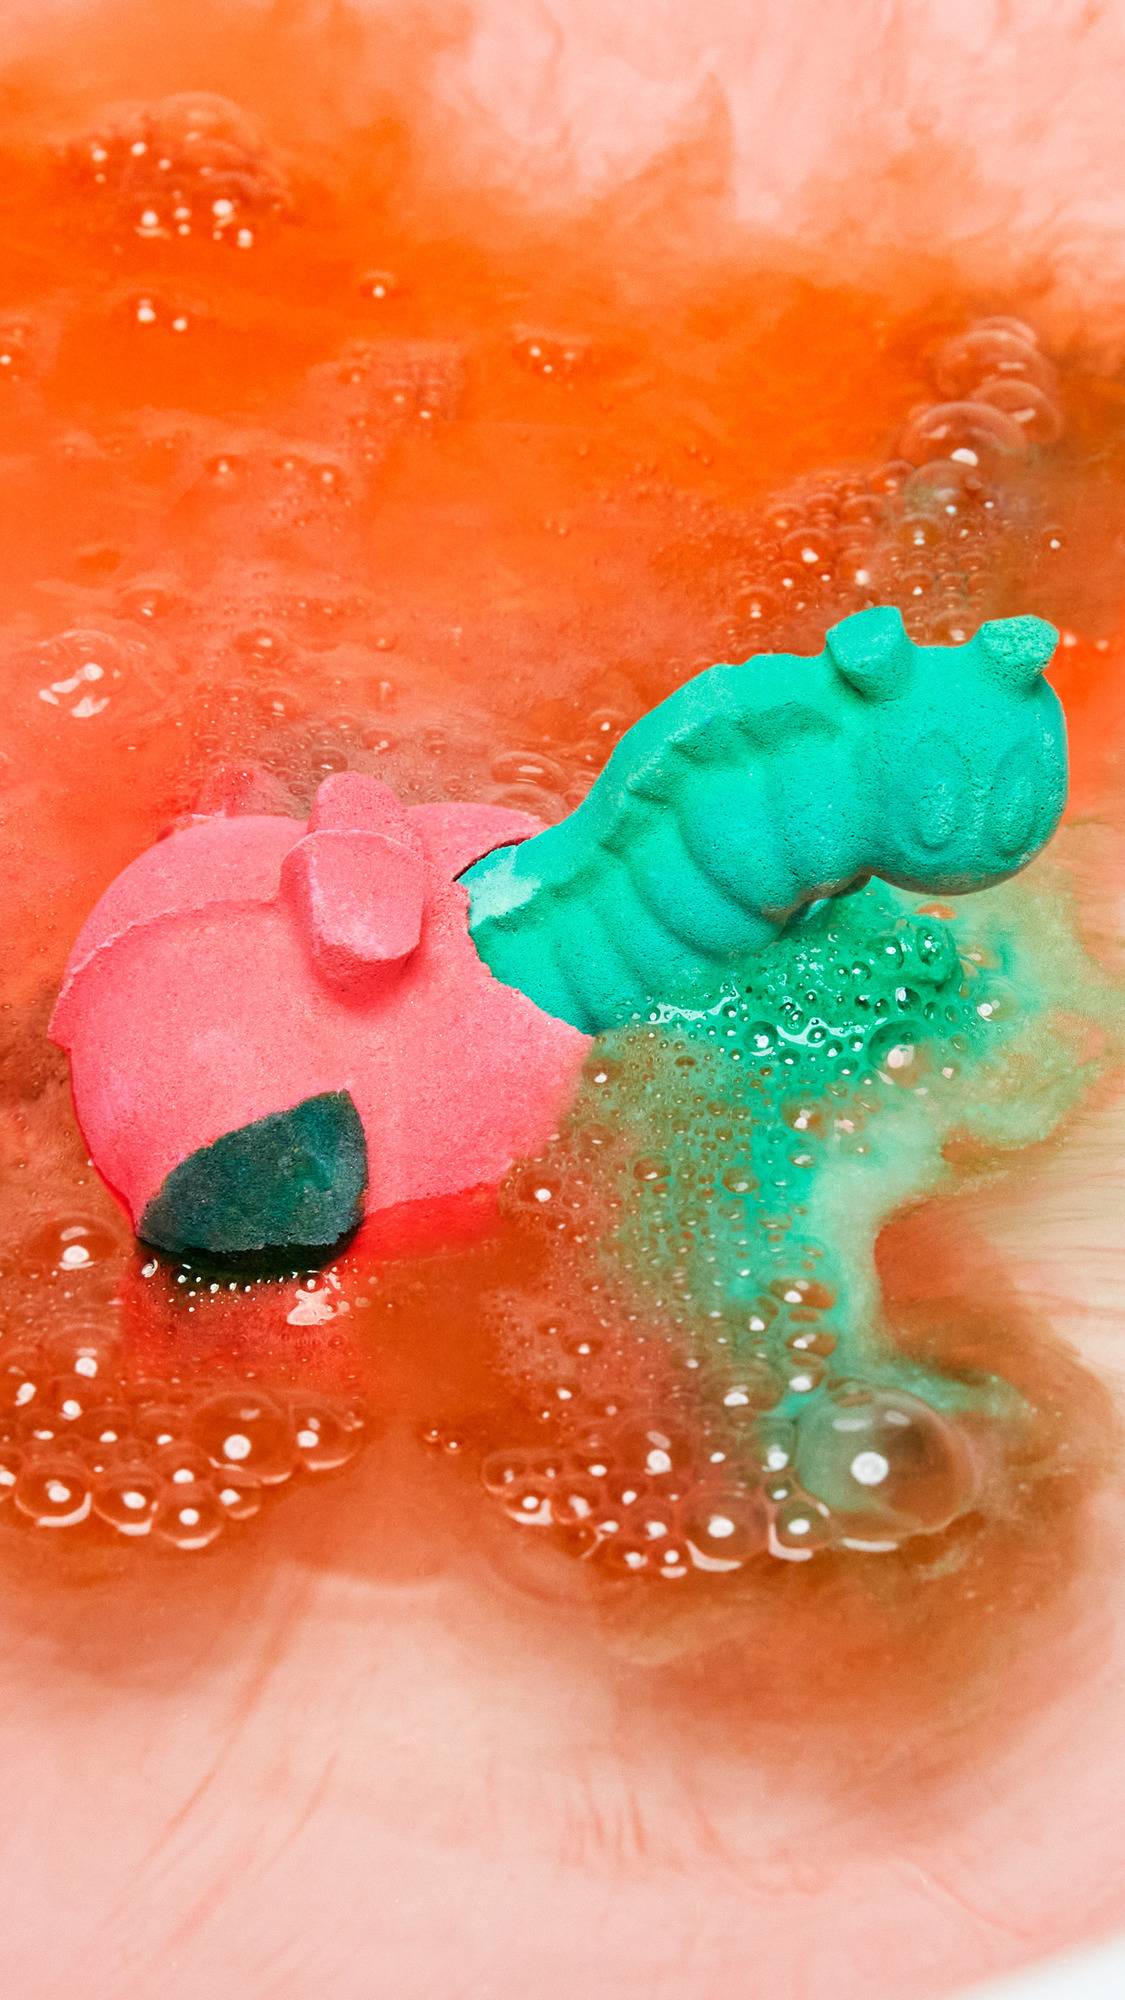 The Apple A Day bath bomb has been gently placed into the bath water as it begins to disperse velvety ribbons of red and green foam. 